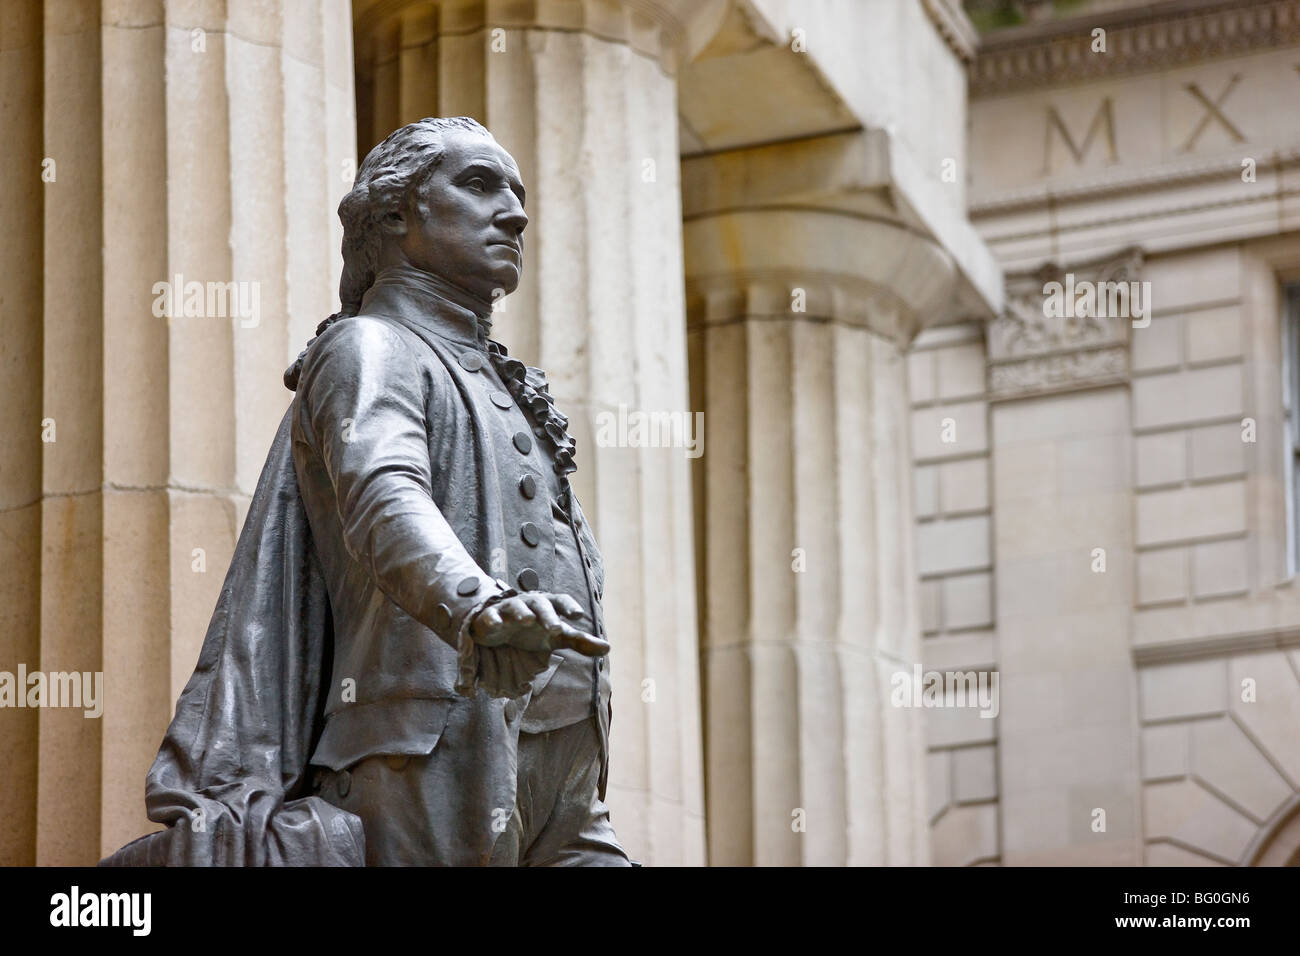 A statue of George Washington, first president of the United States, in front of Federal Hall in New York City, USA Stock Photo